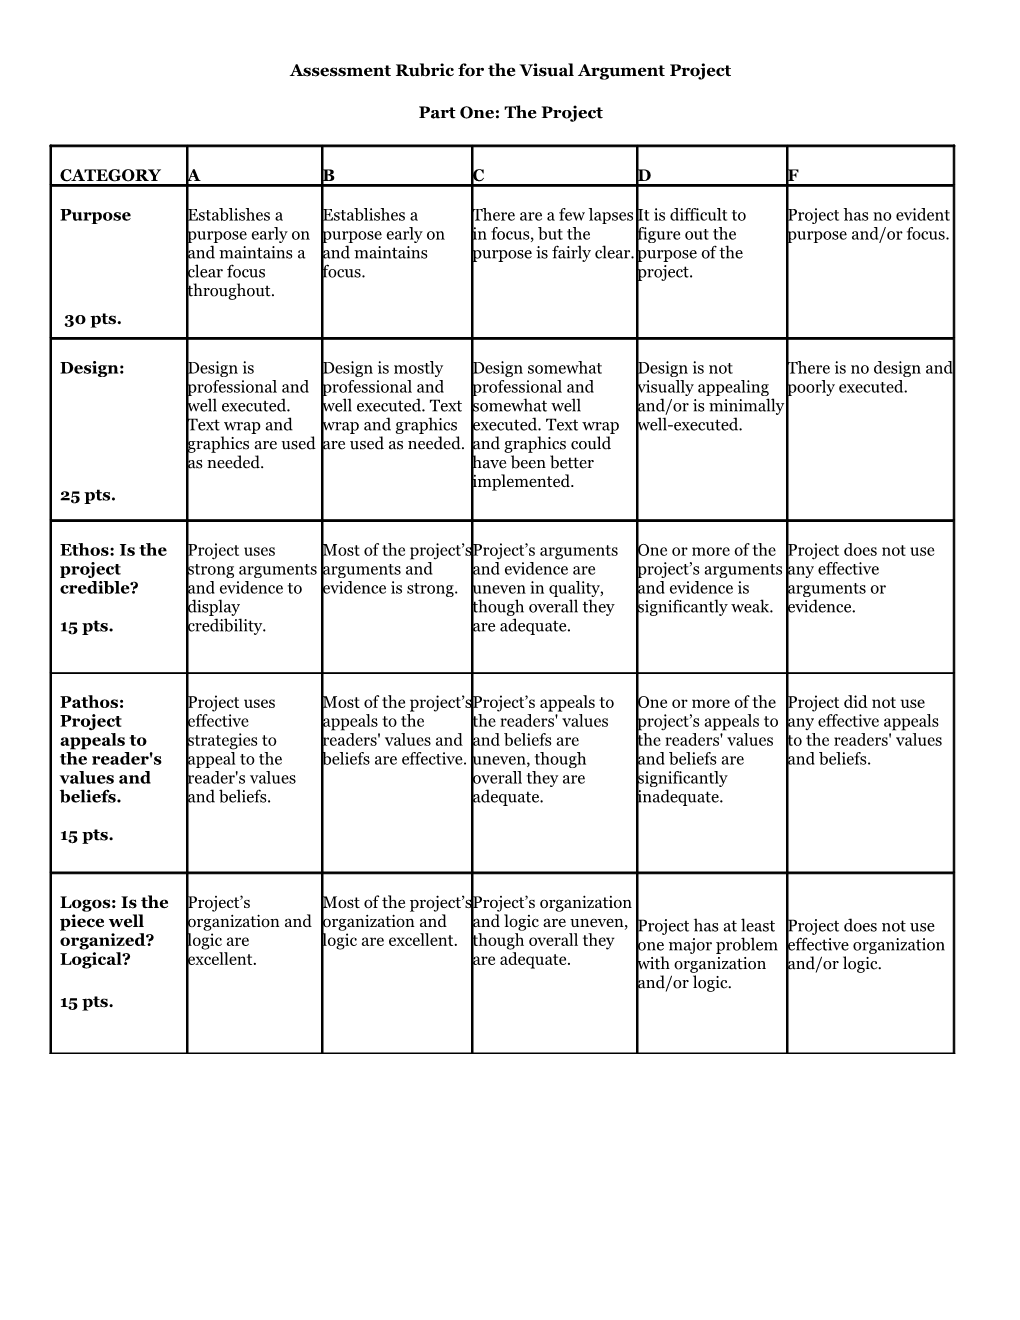 Assessment Rubric for the Visual Argument Project